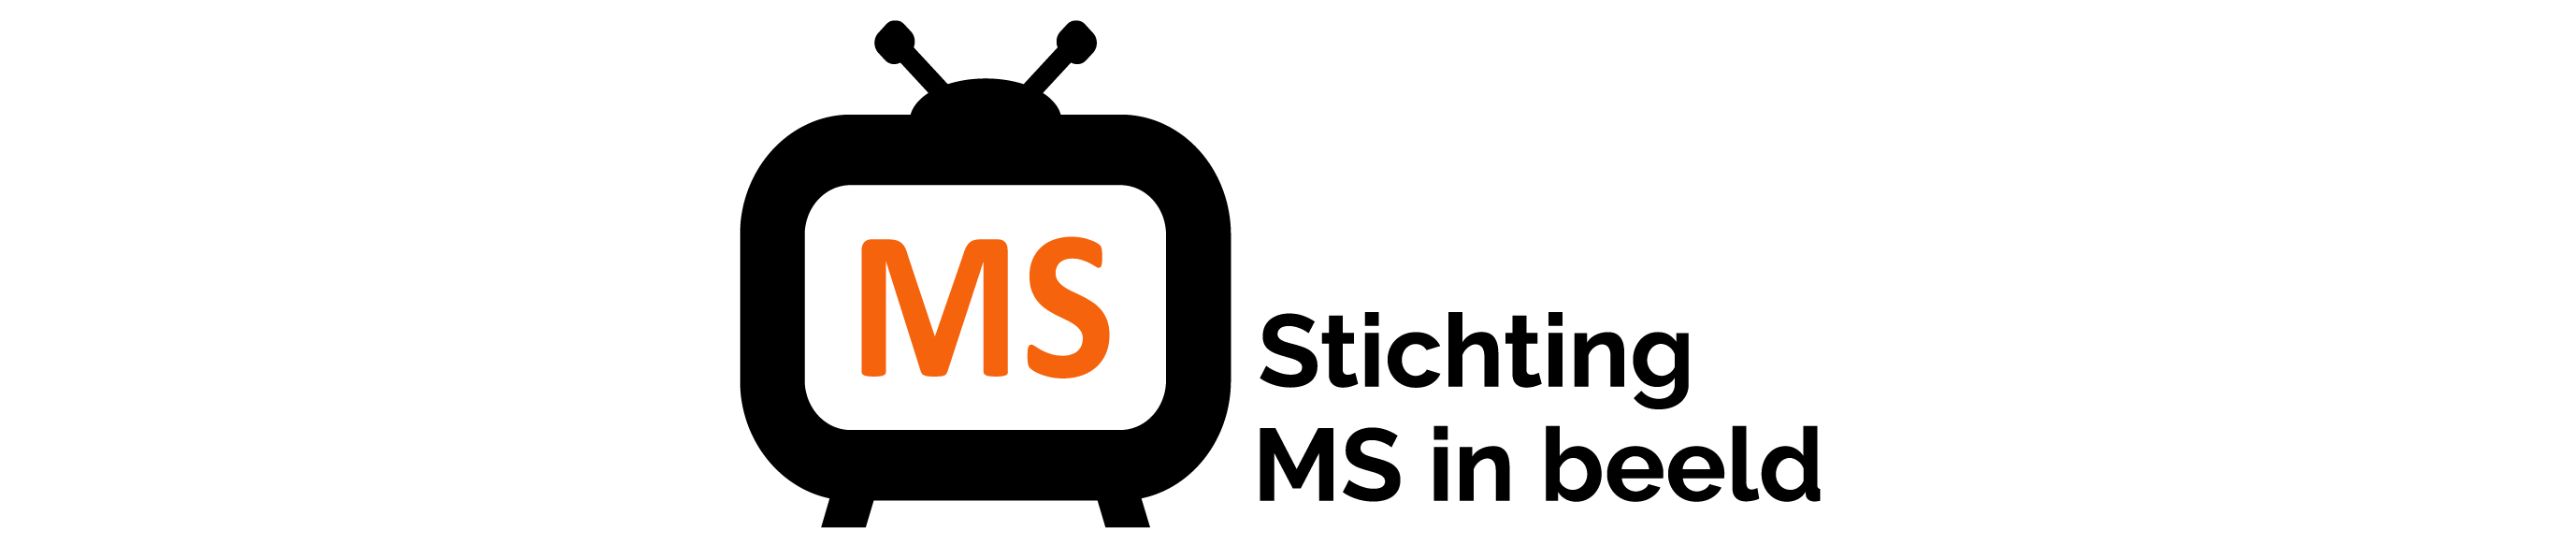 Stichting MS in beeld